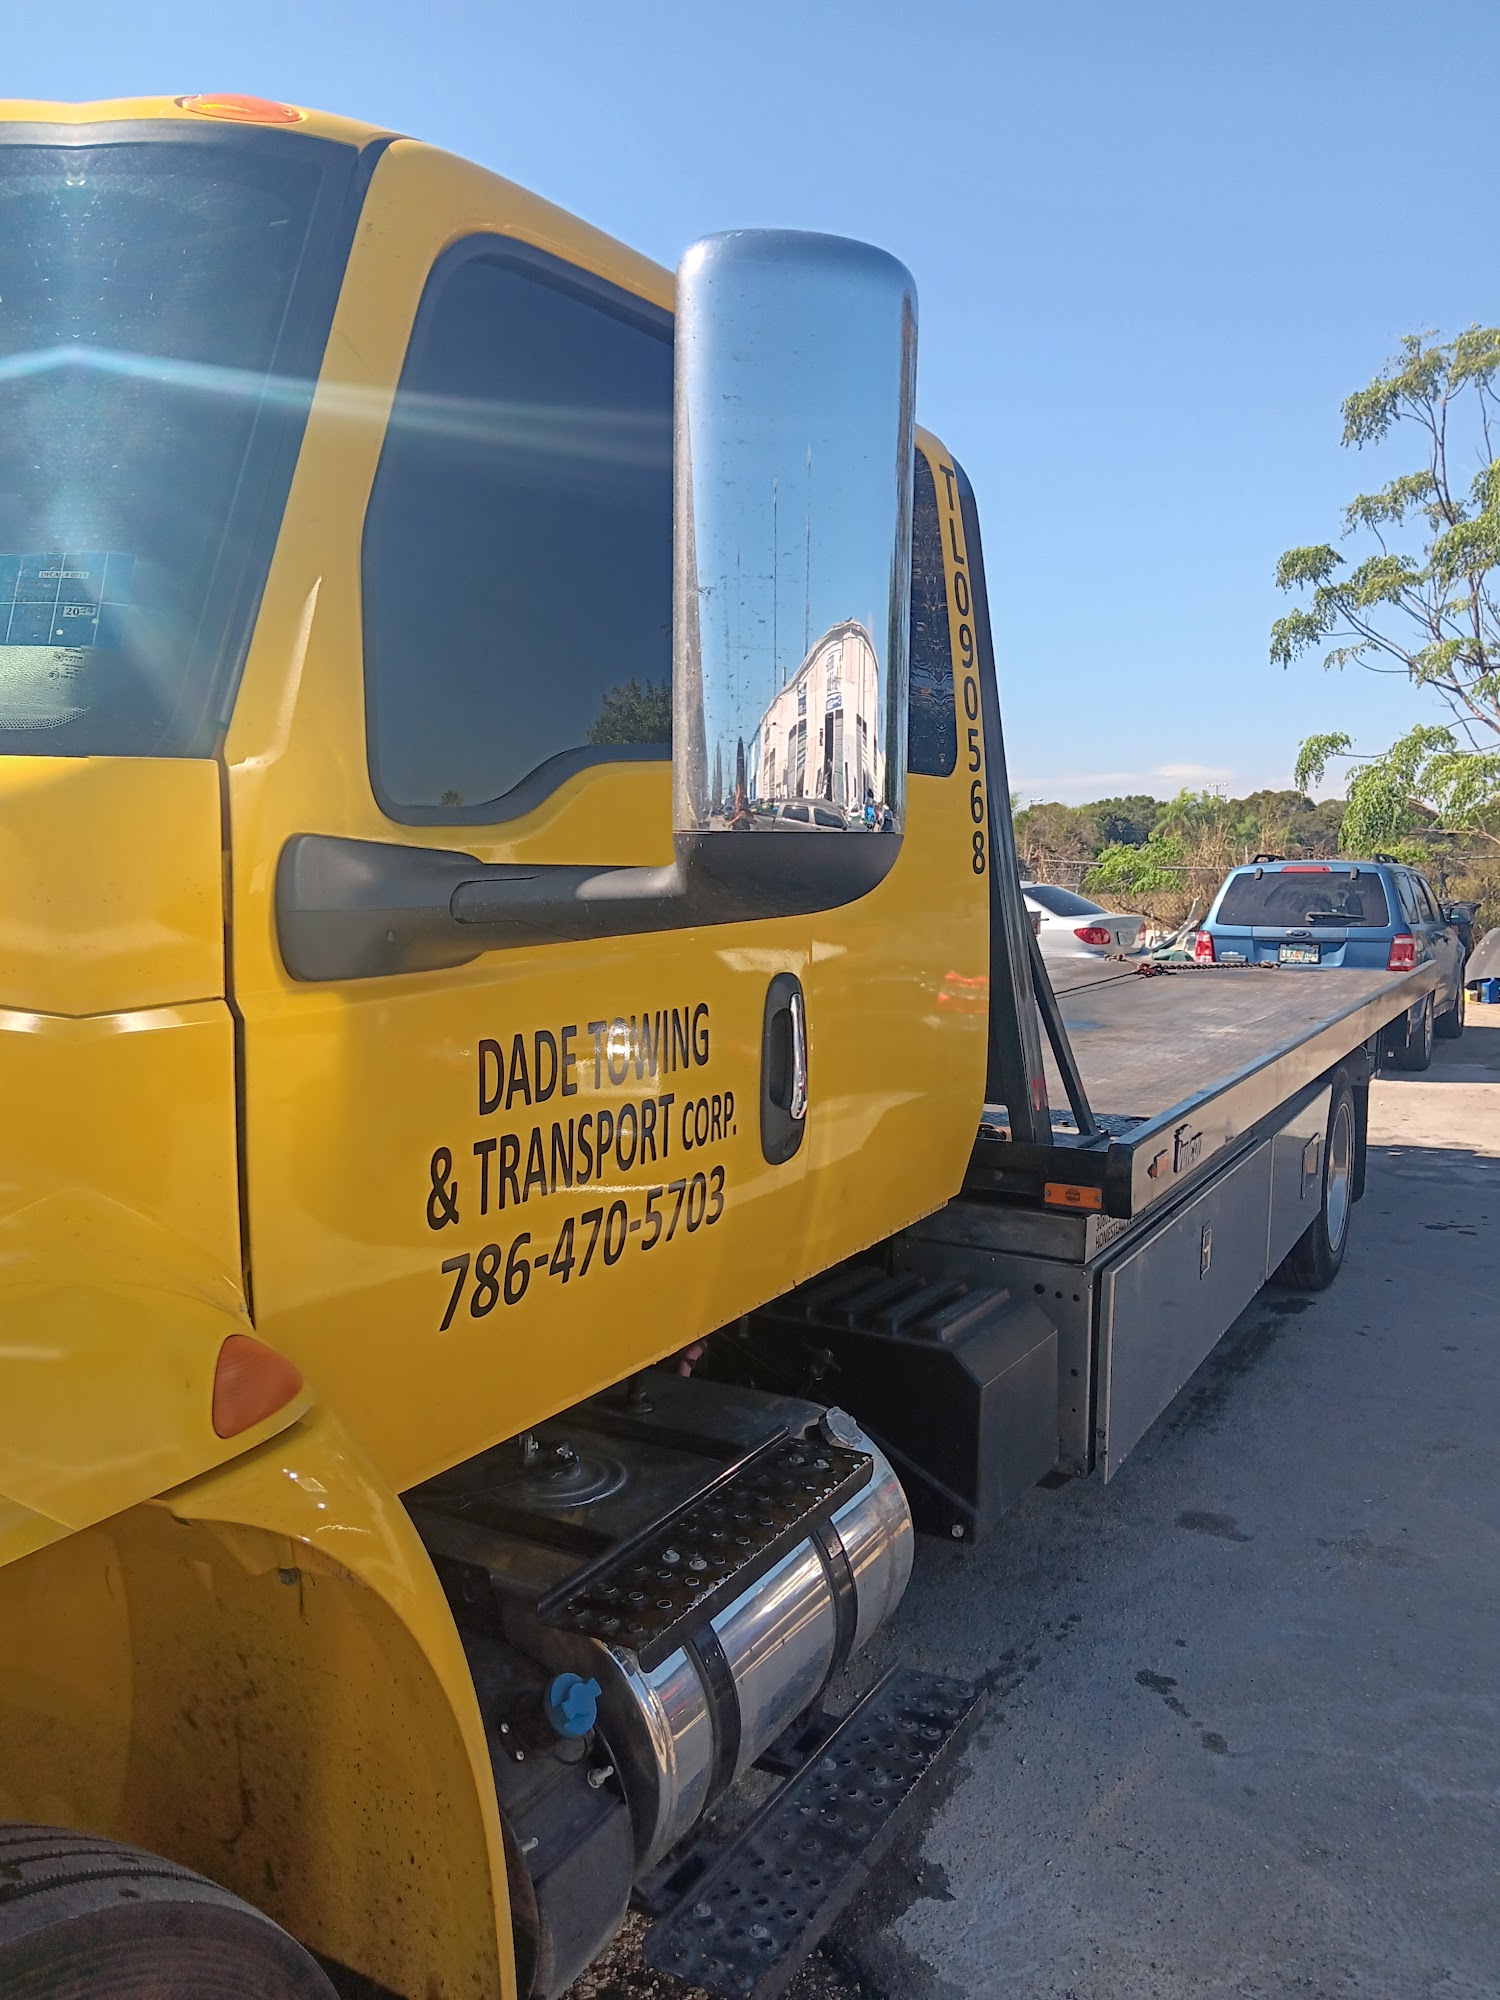 Dade Towing and Transport Corp